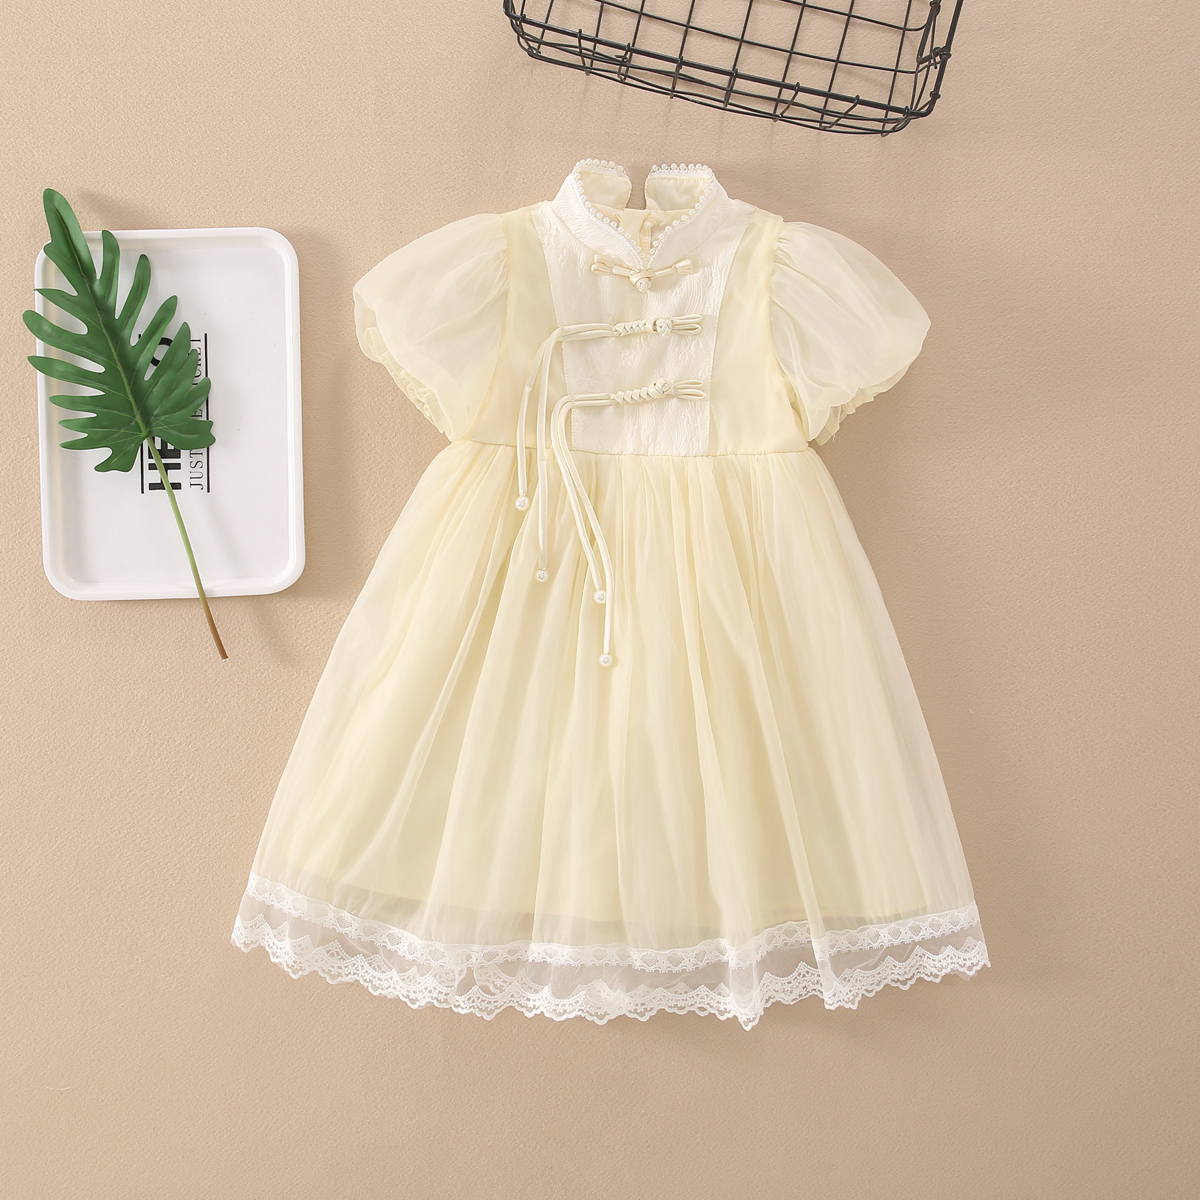 bright apricot top quality royal kids clothing girls dresses cheongsam qipao fast delivery